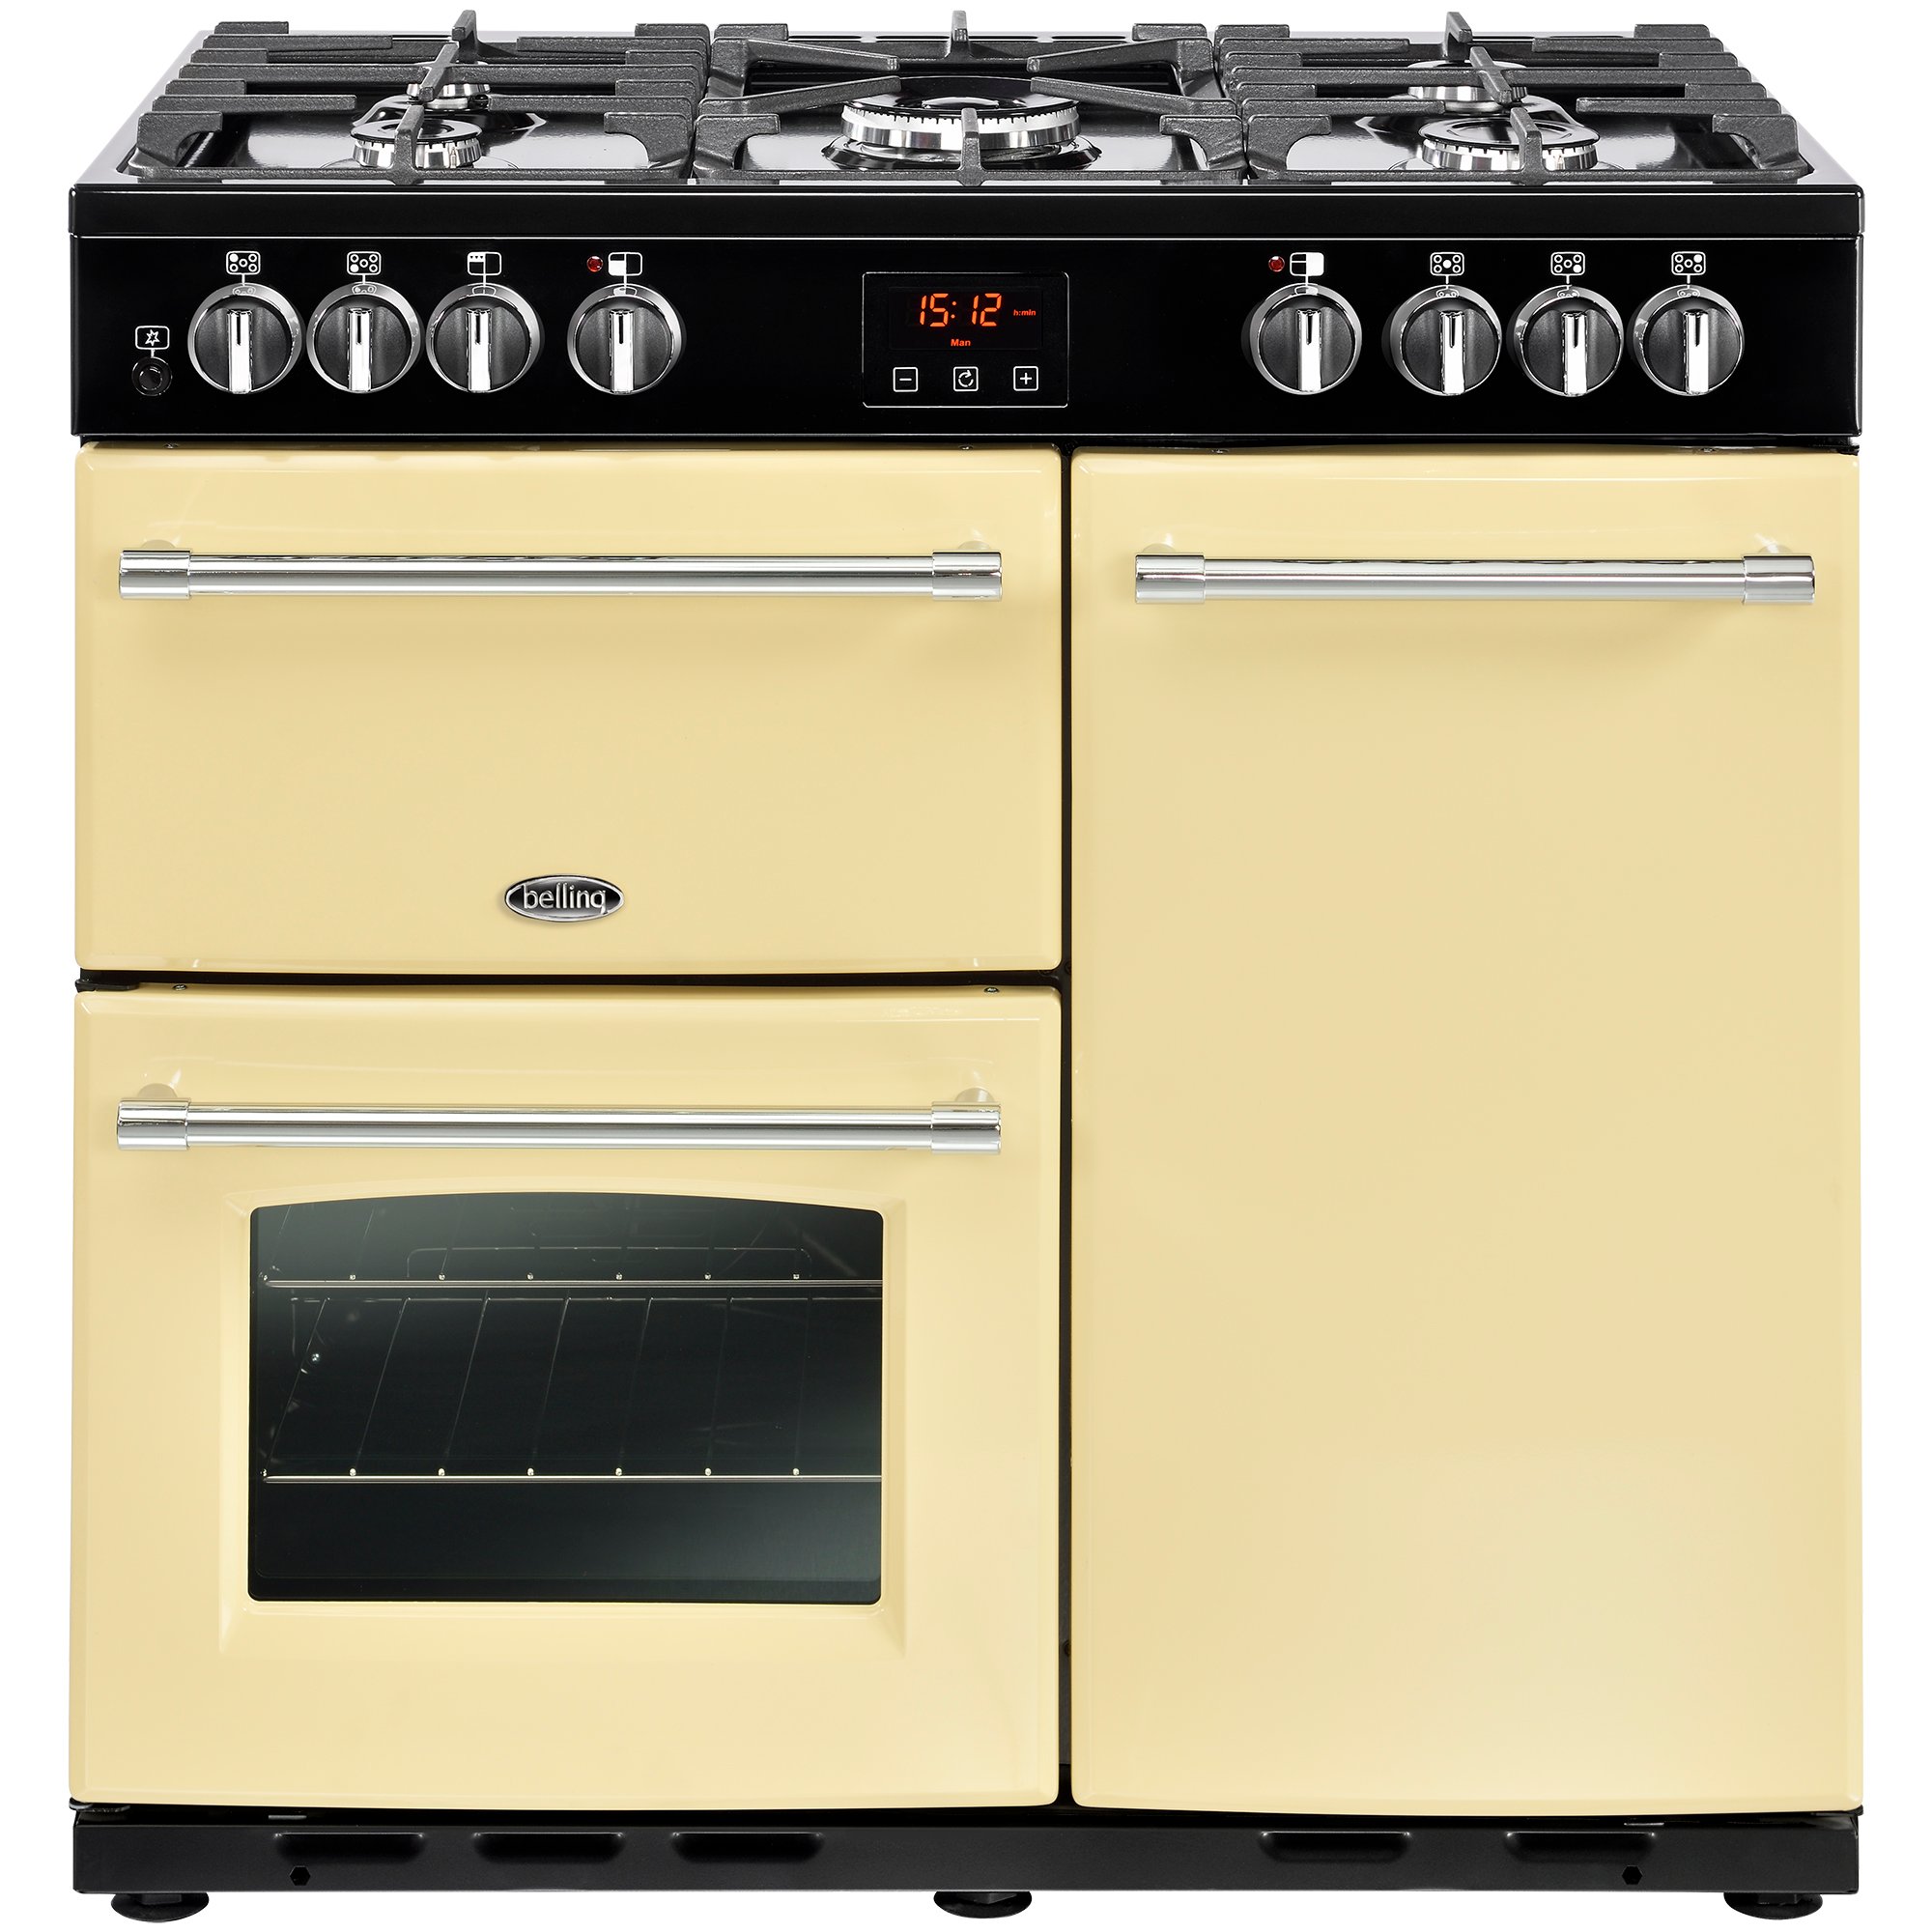 90cm dual fuel range cooker with 4kW PowerWok, Maxi-Clock, 91 litre market leading tall oven and easy clean enamel.